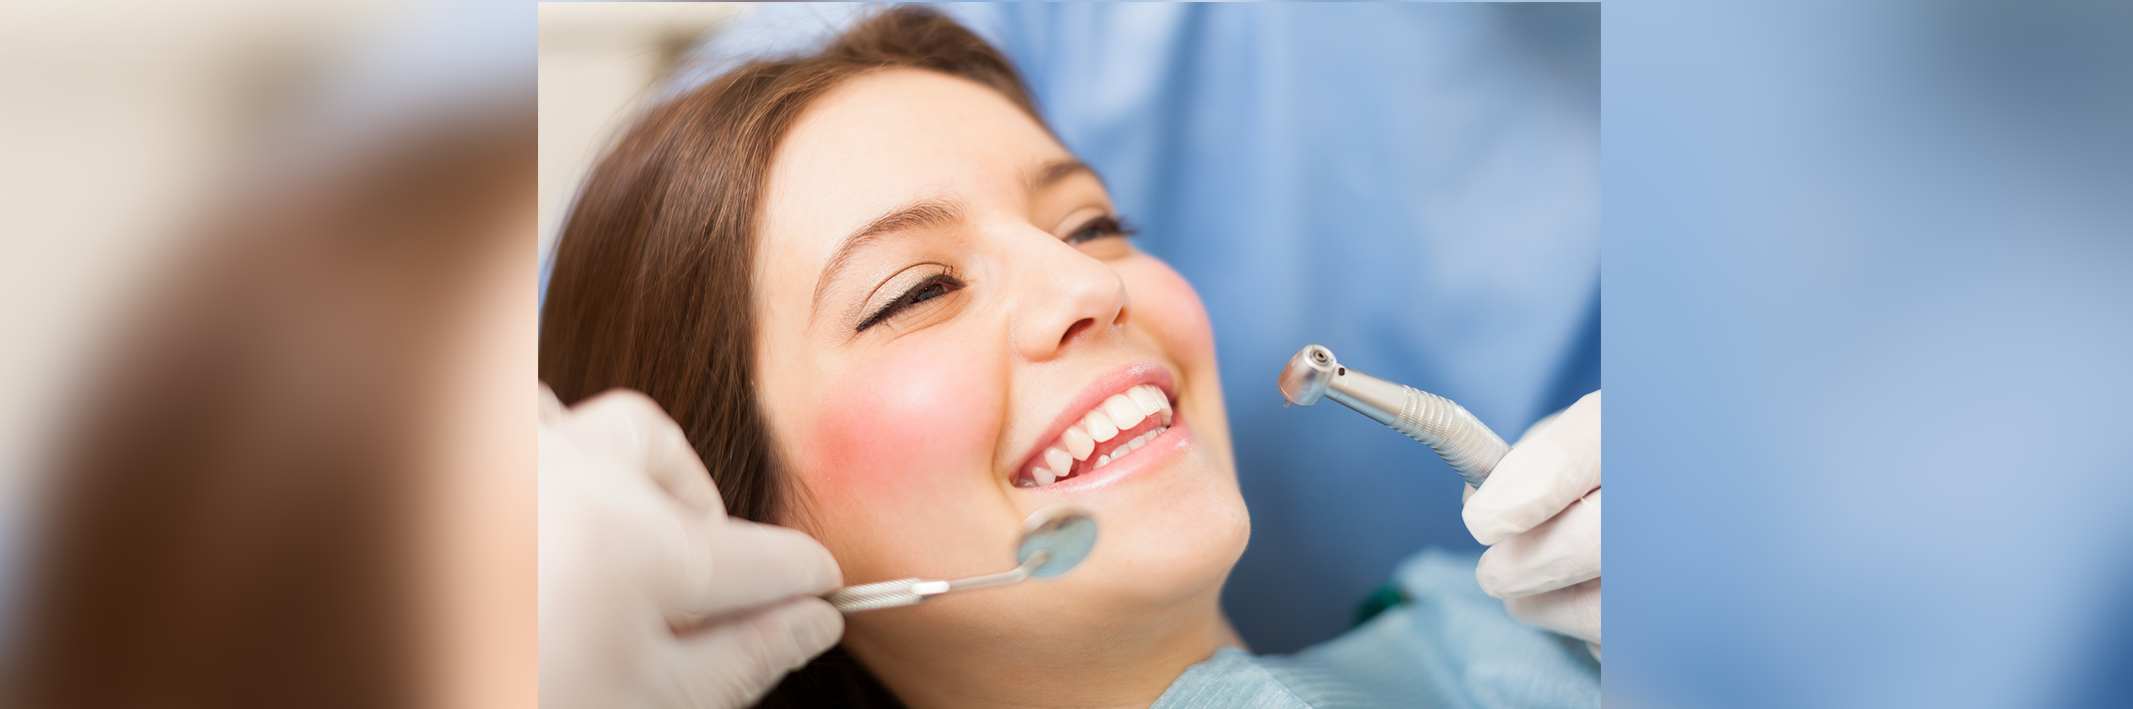 What are the Other Options to a Root Canal?